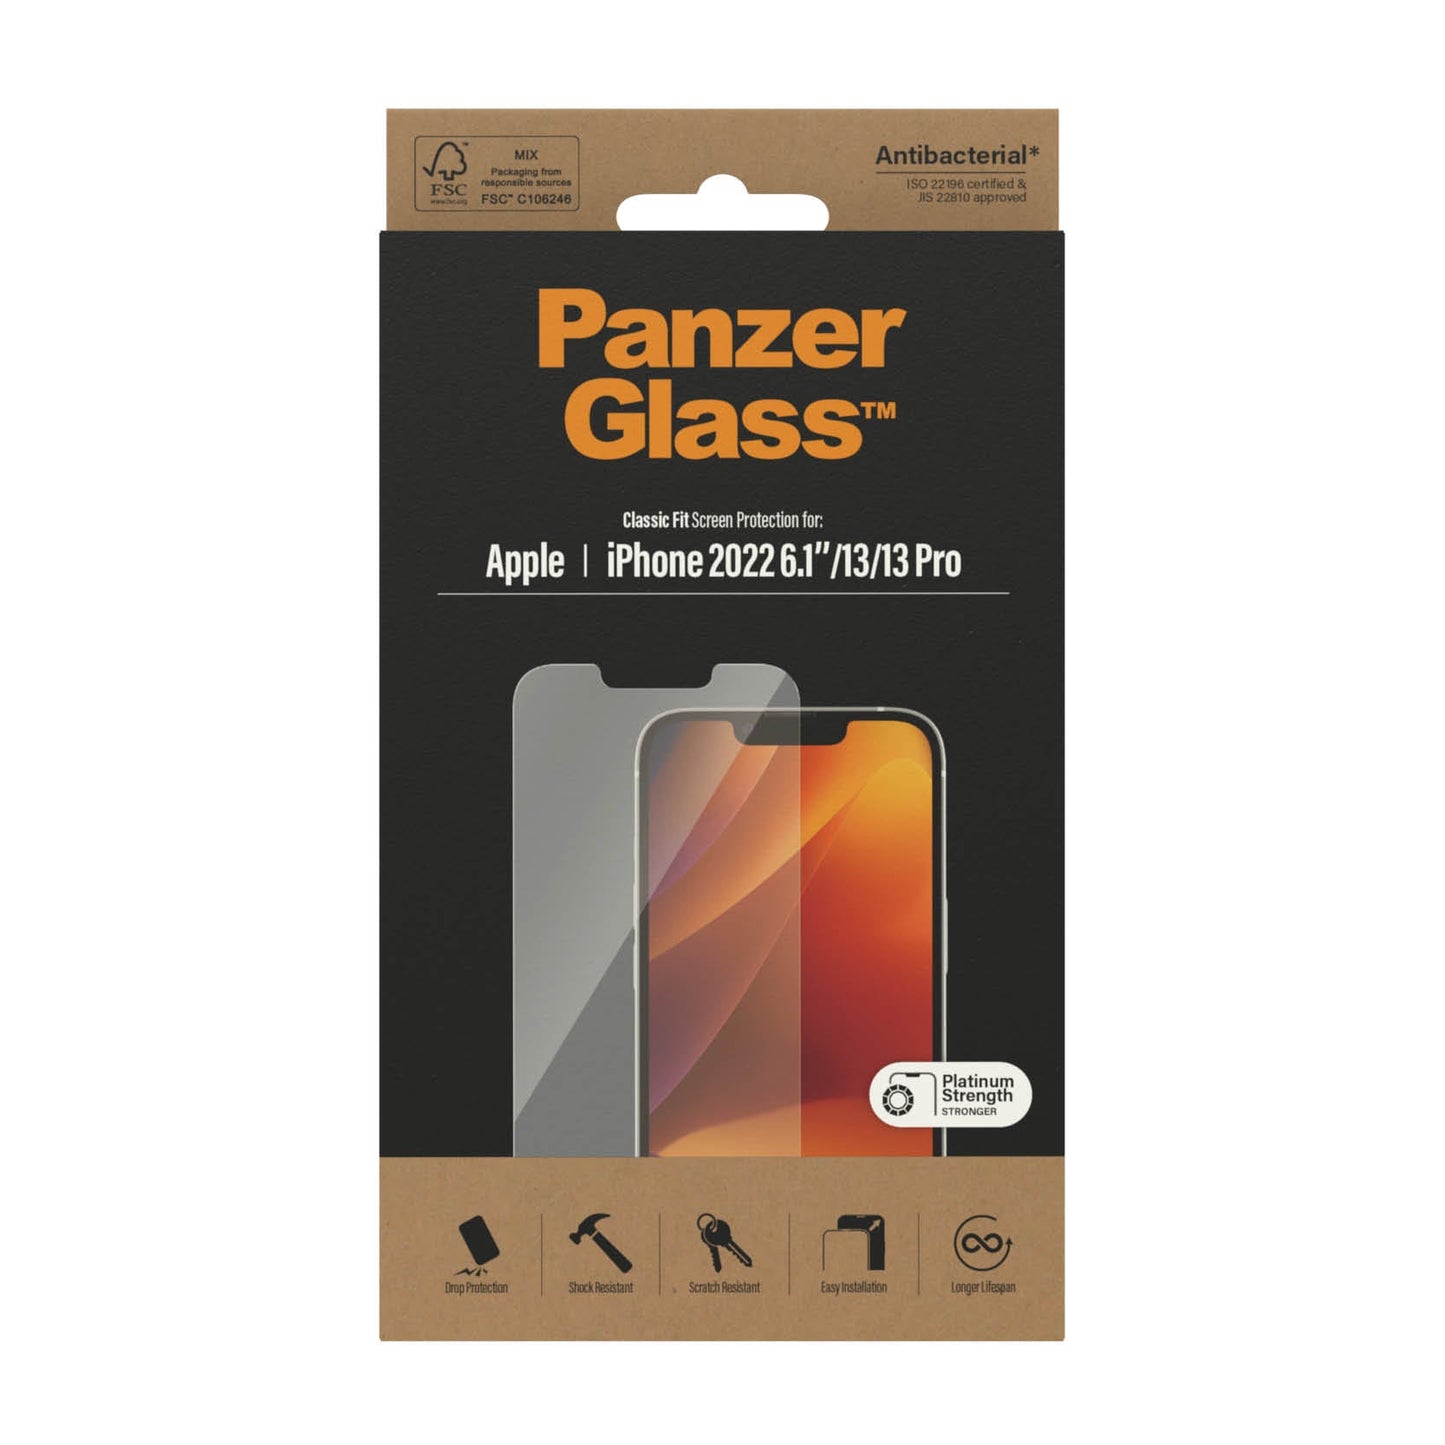 PanzerGlass™ Classic Fit Screen Protector for iPhone 14, iPhone 13/13 Pro - Clear